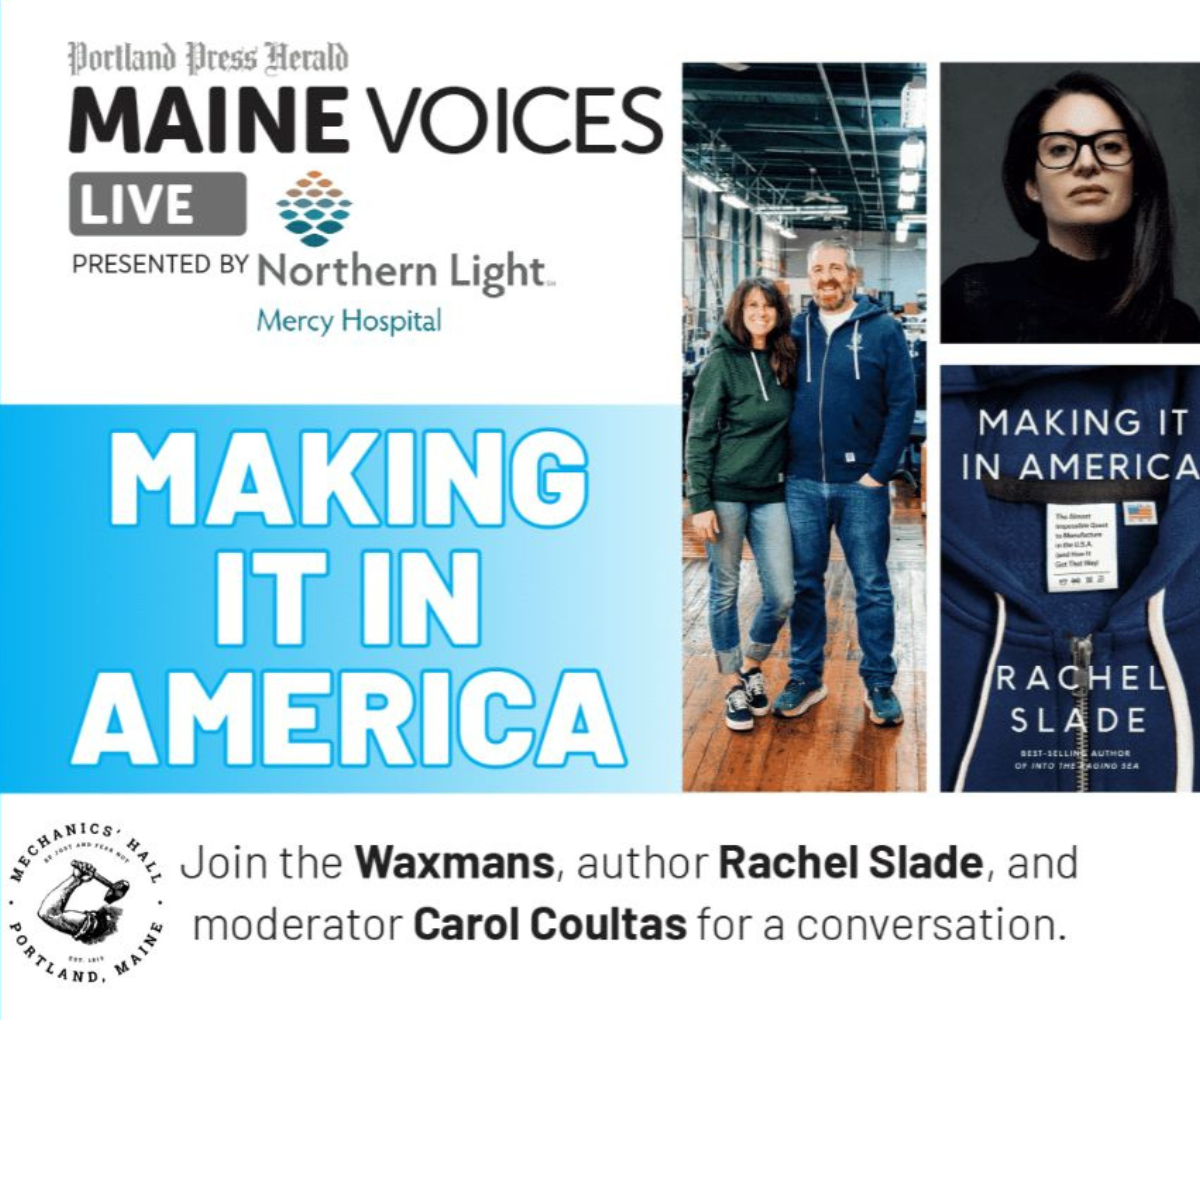 Maine Voices Live: Making it in America